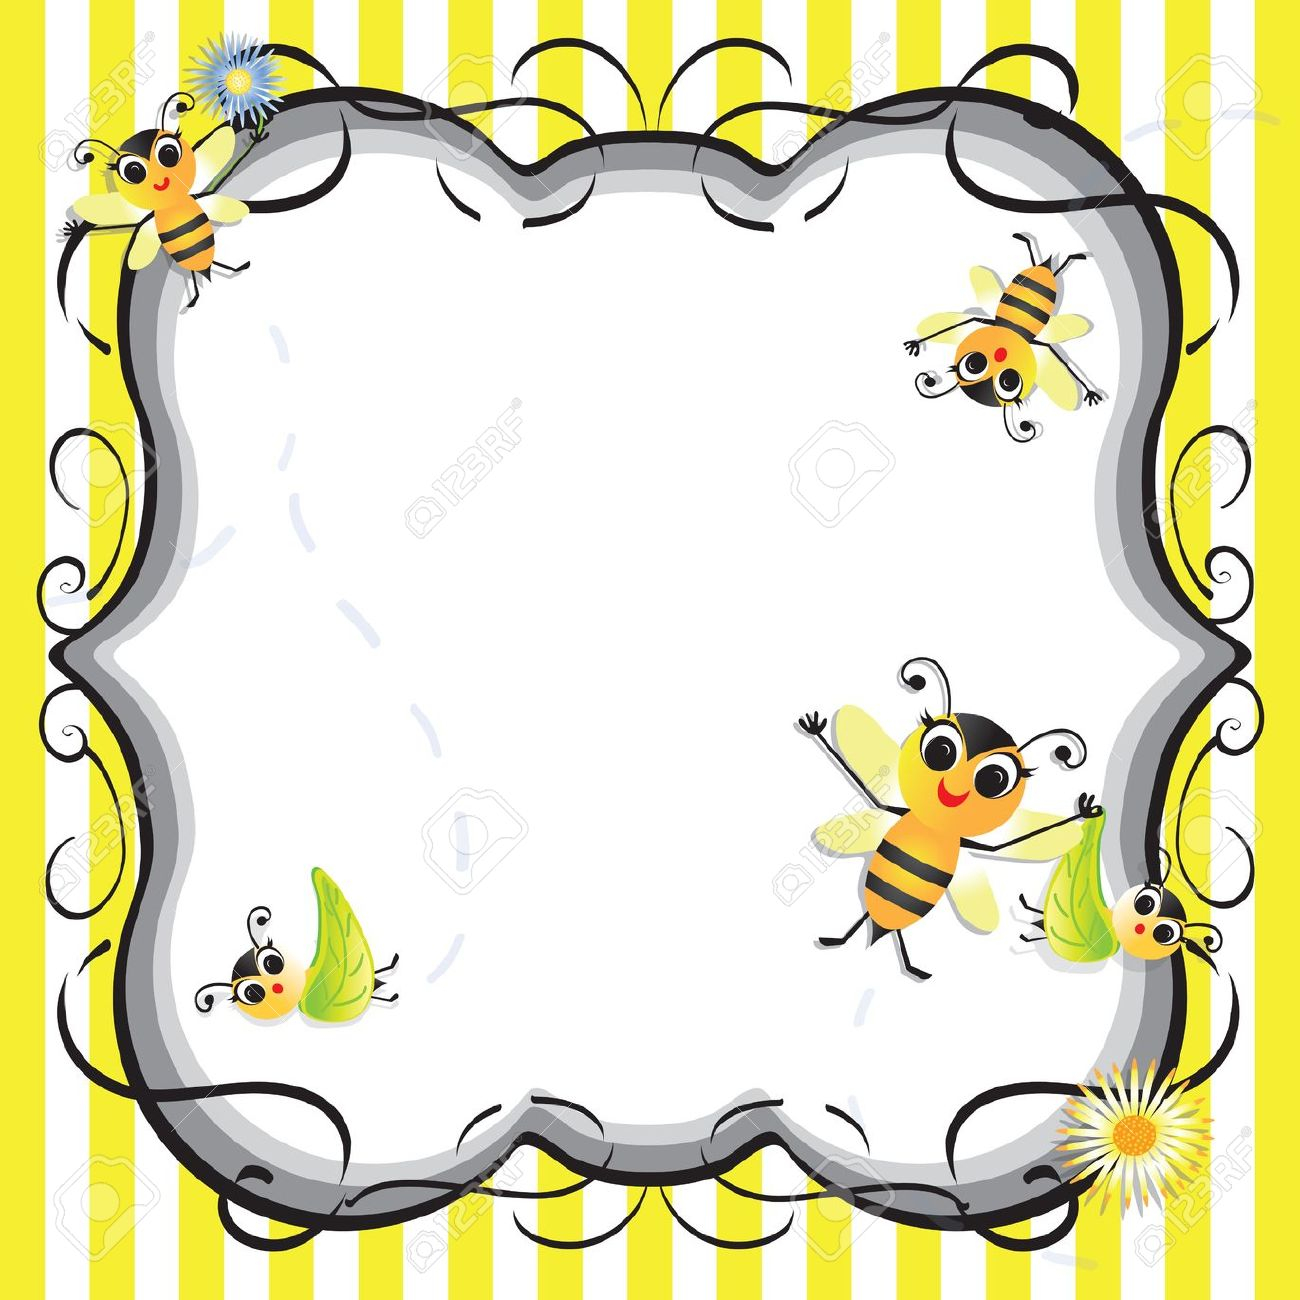 Spelling Bee Invitations throughout dimensions 1300 X 1300